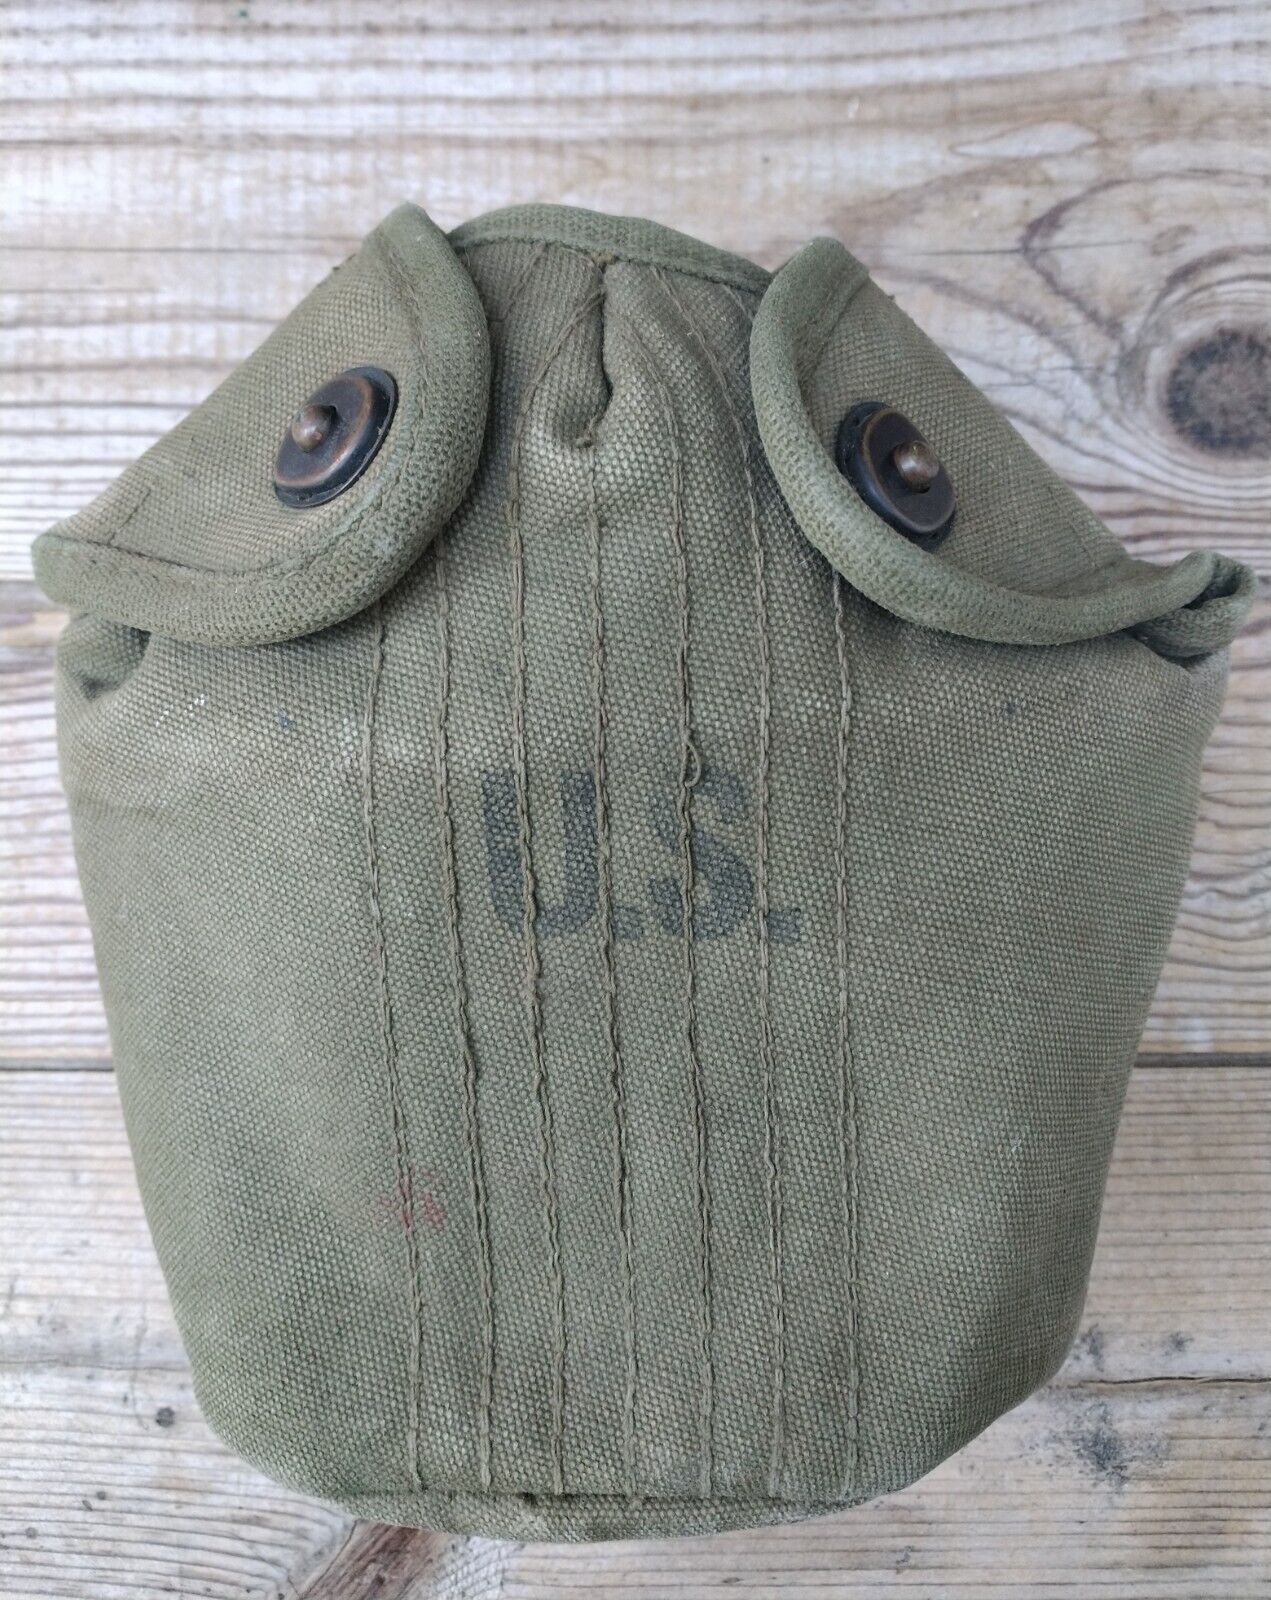 ORIGINAL LATE POST WWII WW2 M1910 CANTEEN COVER FOR M1936 PISTOL BELT OD7